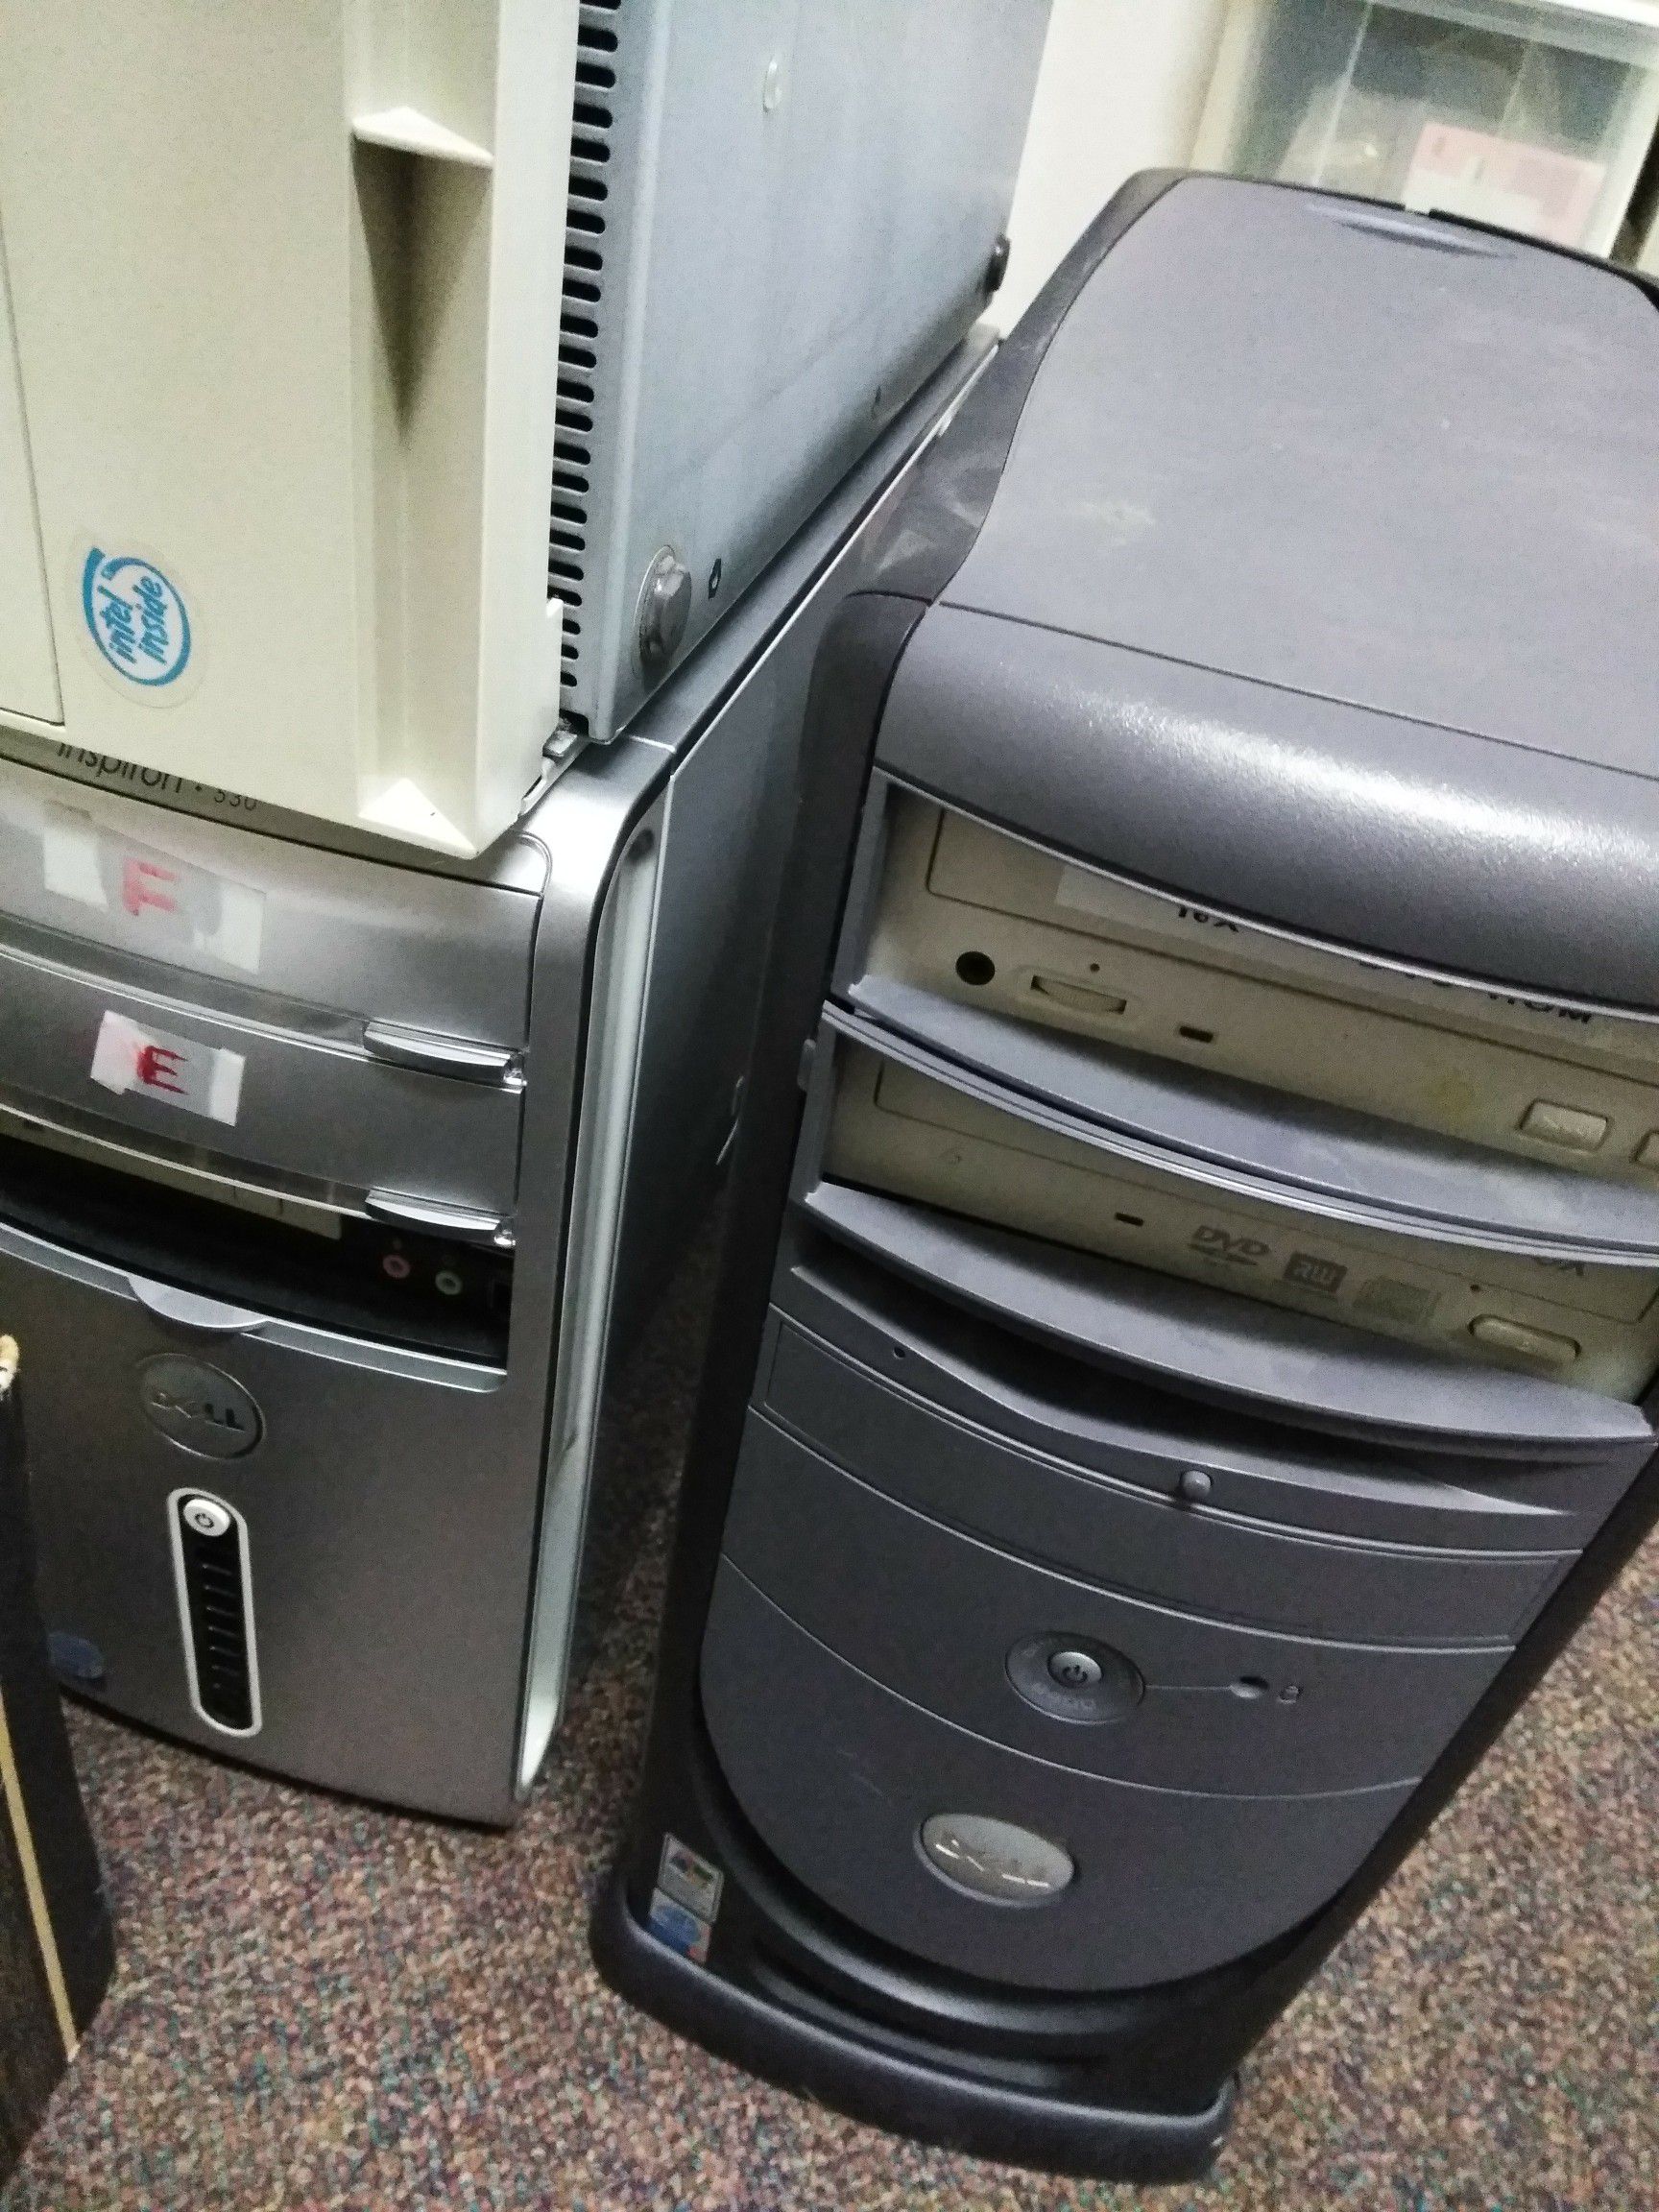 5 DELL DESKTOP COMPUTERS..IBM.... E MACHINE..MORE.. ALL 6 SELLING FOR PARTS..